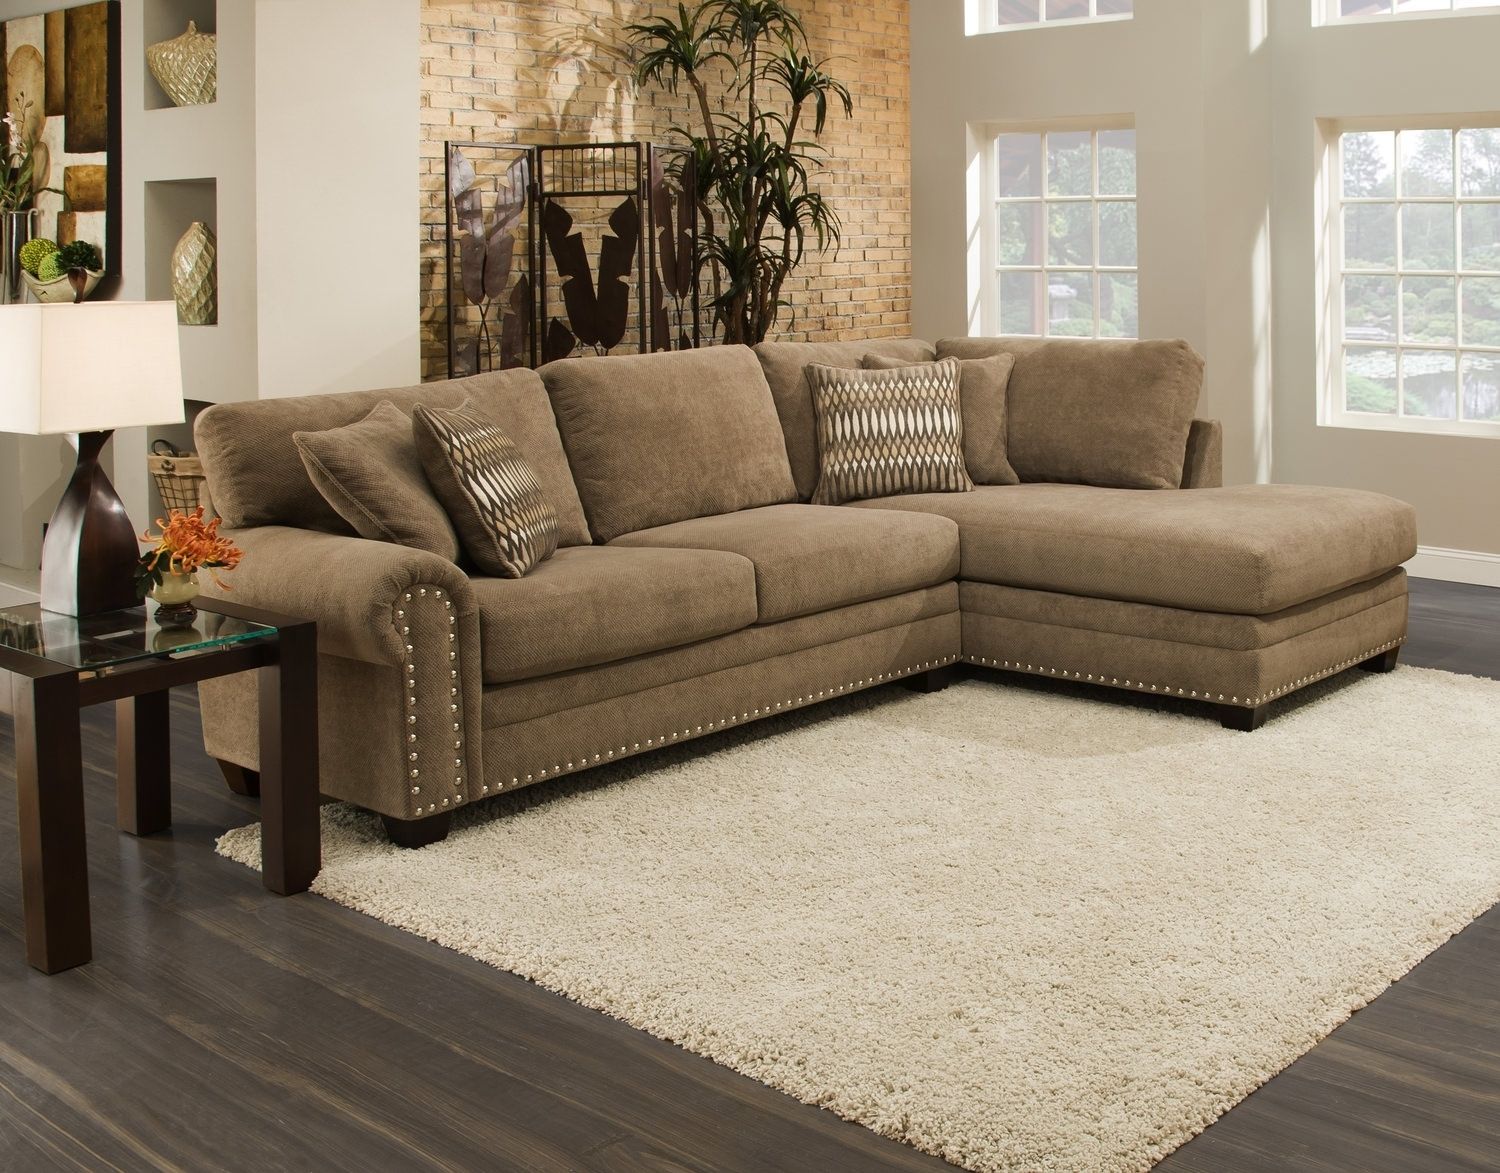 Sectional Sofas Duluth Mn • Sectional Sofa With Regard To Duluth Mn Sectional Sofas (View 8 of 10)